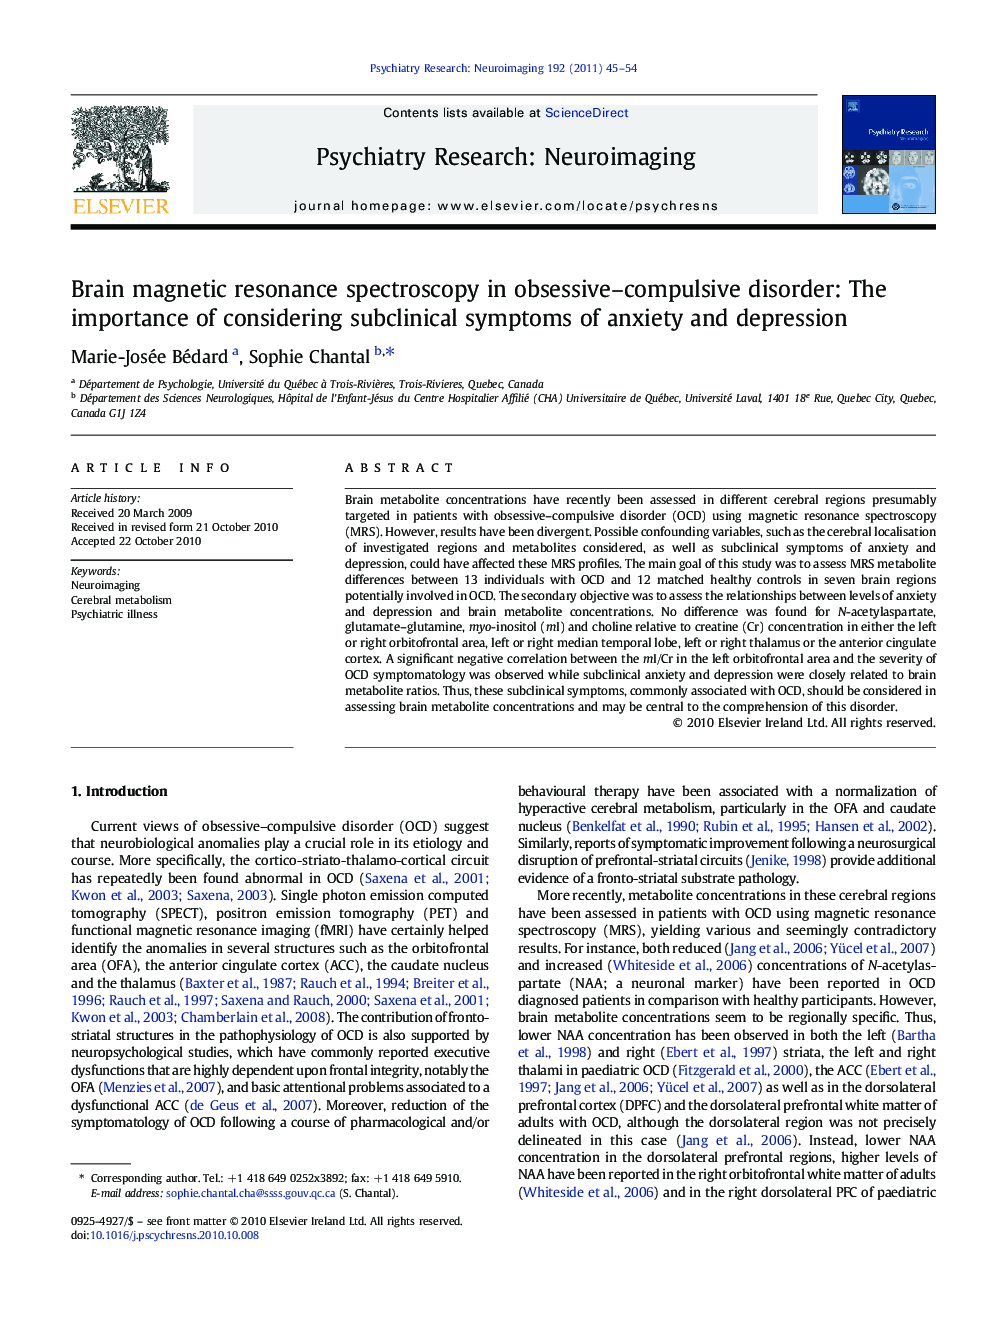 Brain magnetic resonance spectroscopy in obsessive–compulsive disorder: The importance of considering subclinical symptoms of anxiety and depression